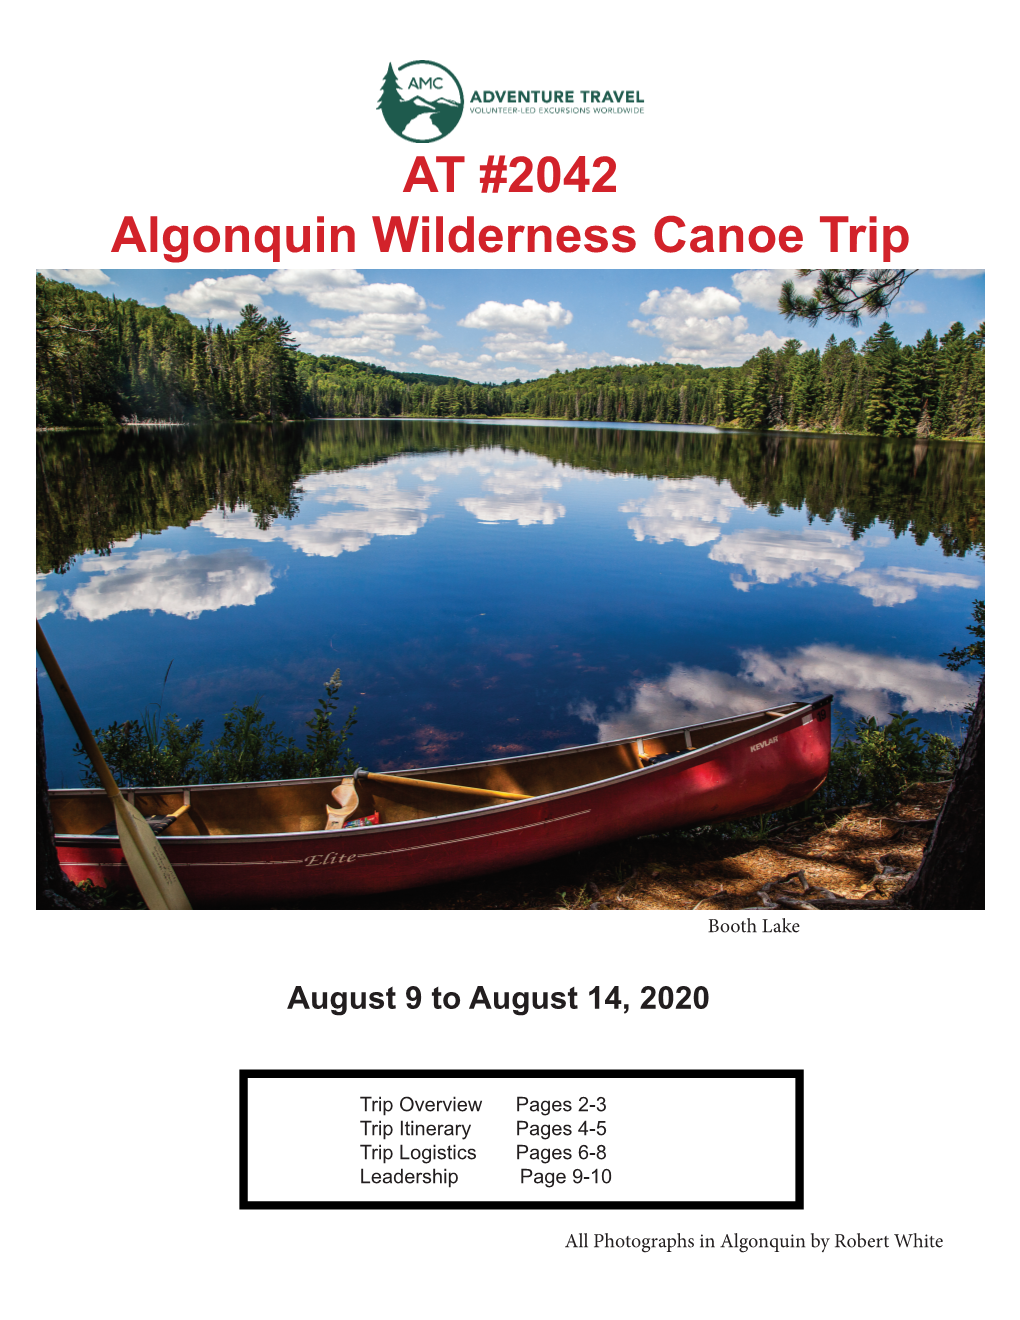 AT #2042 Algonquin Wilderness Canoe Trip